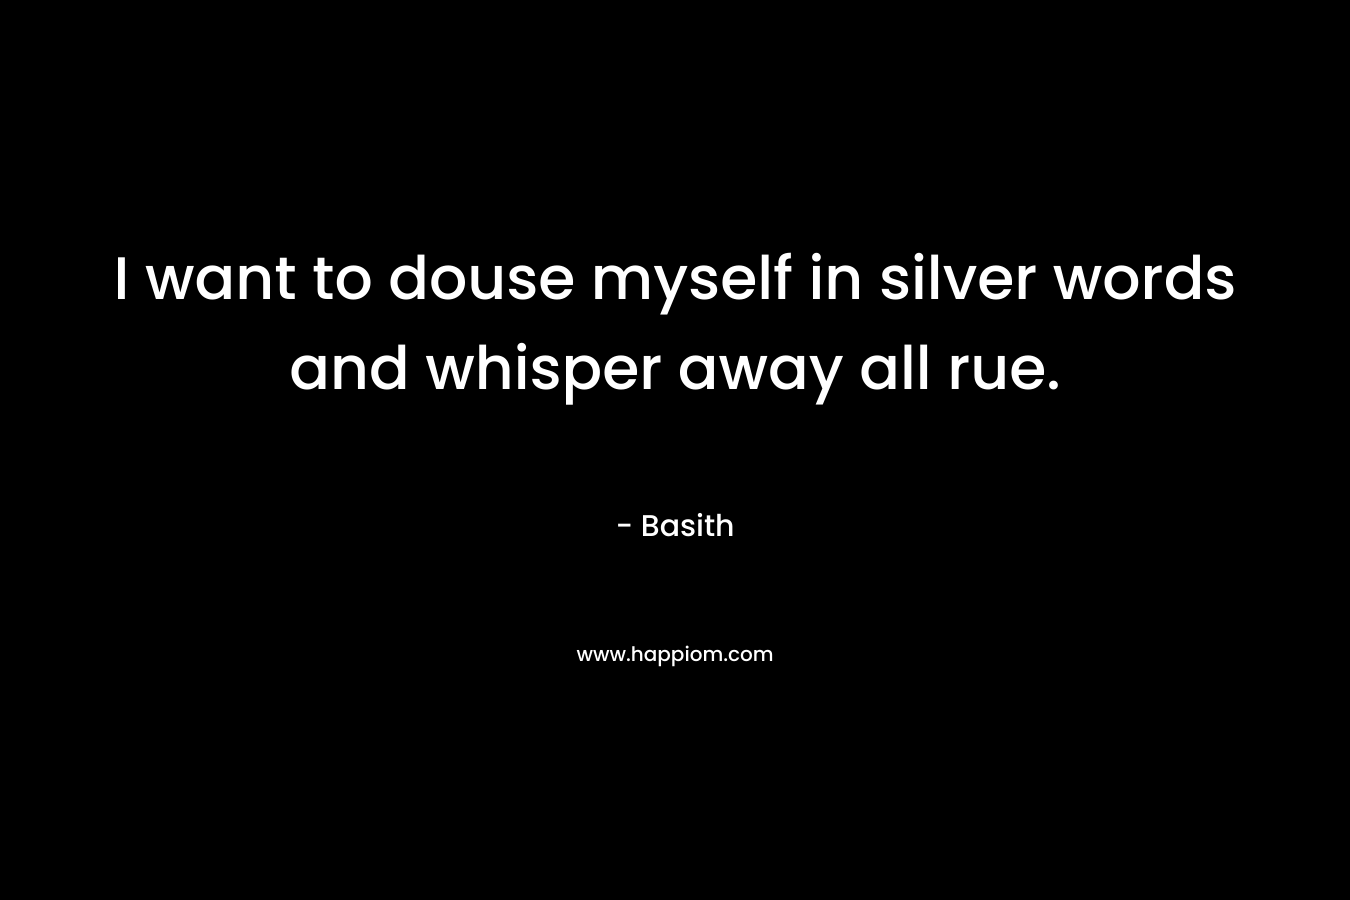 I want to douse myself in silver words and whisper away all rue. – Basith